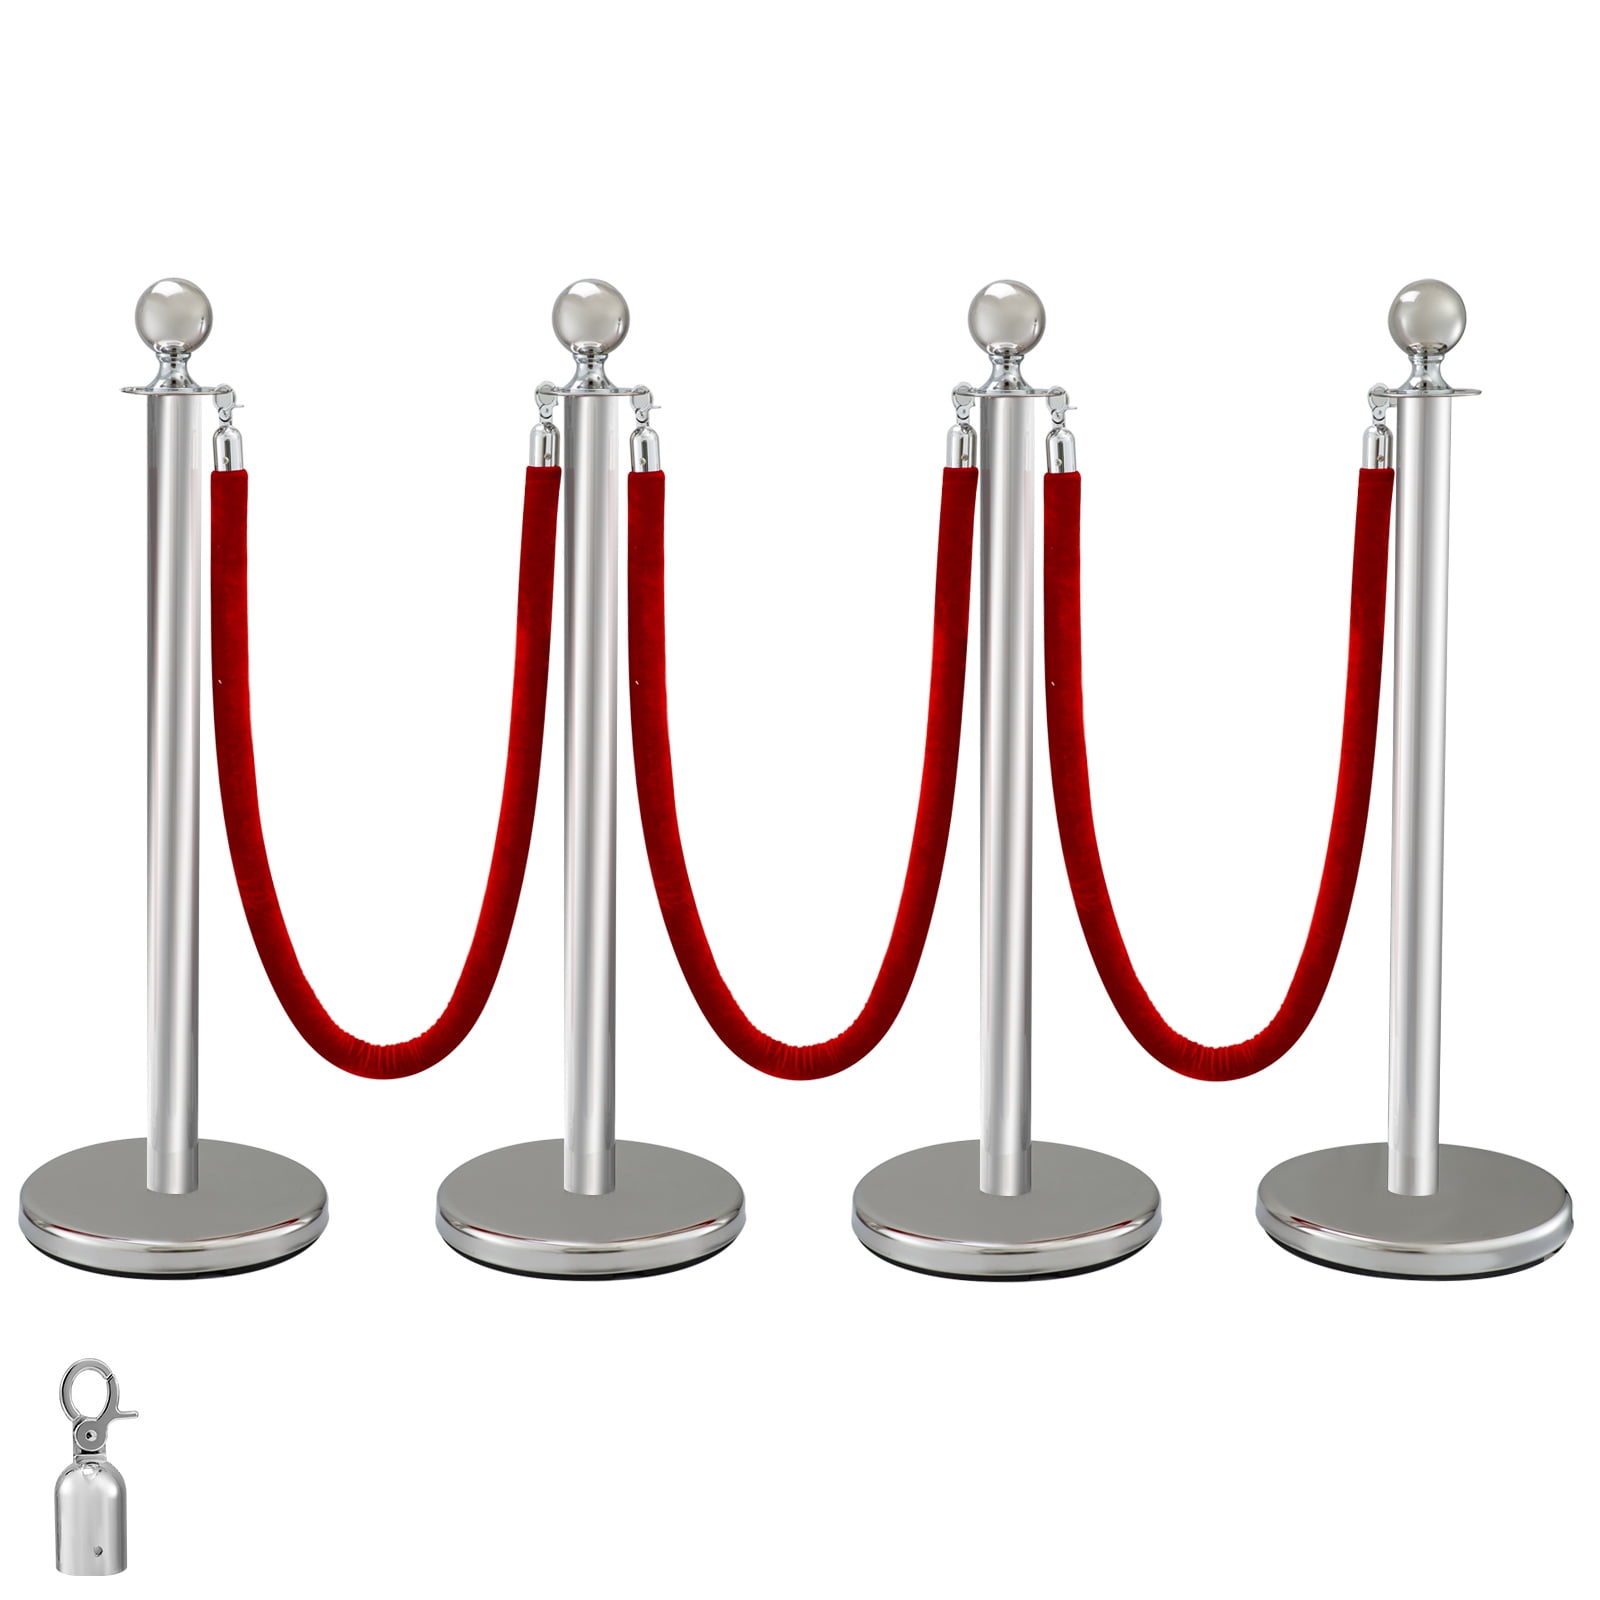 High Quality POSTS NOT INCLUDED Barrier Queue ROPE Red Velvet 1.5m Long 